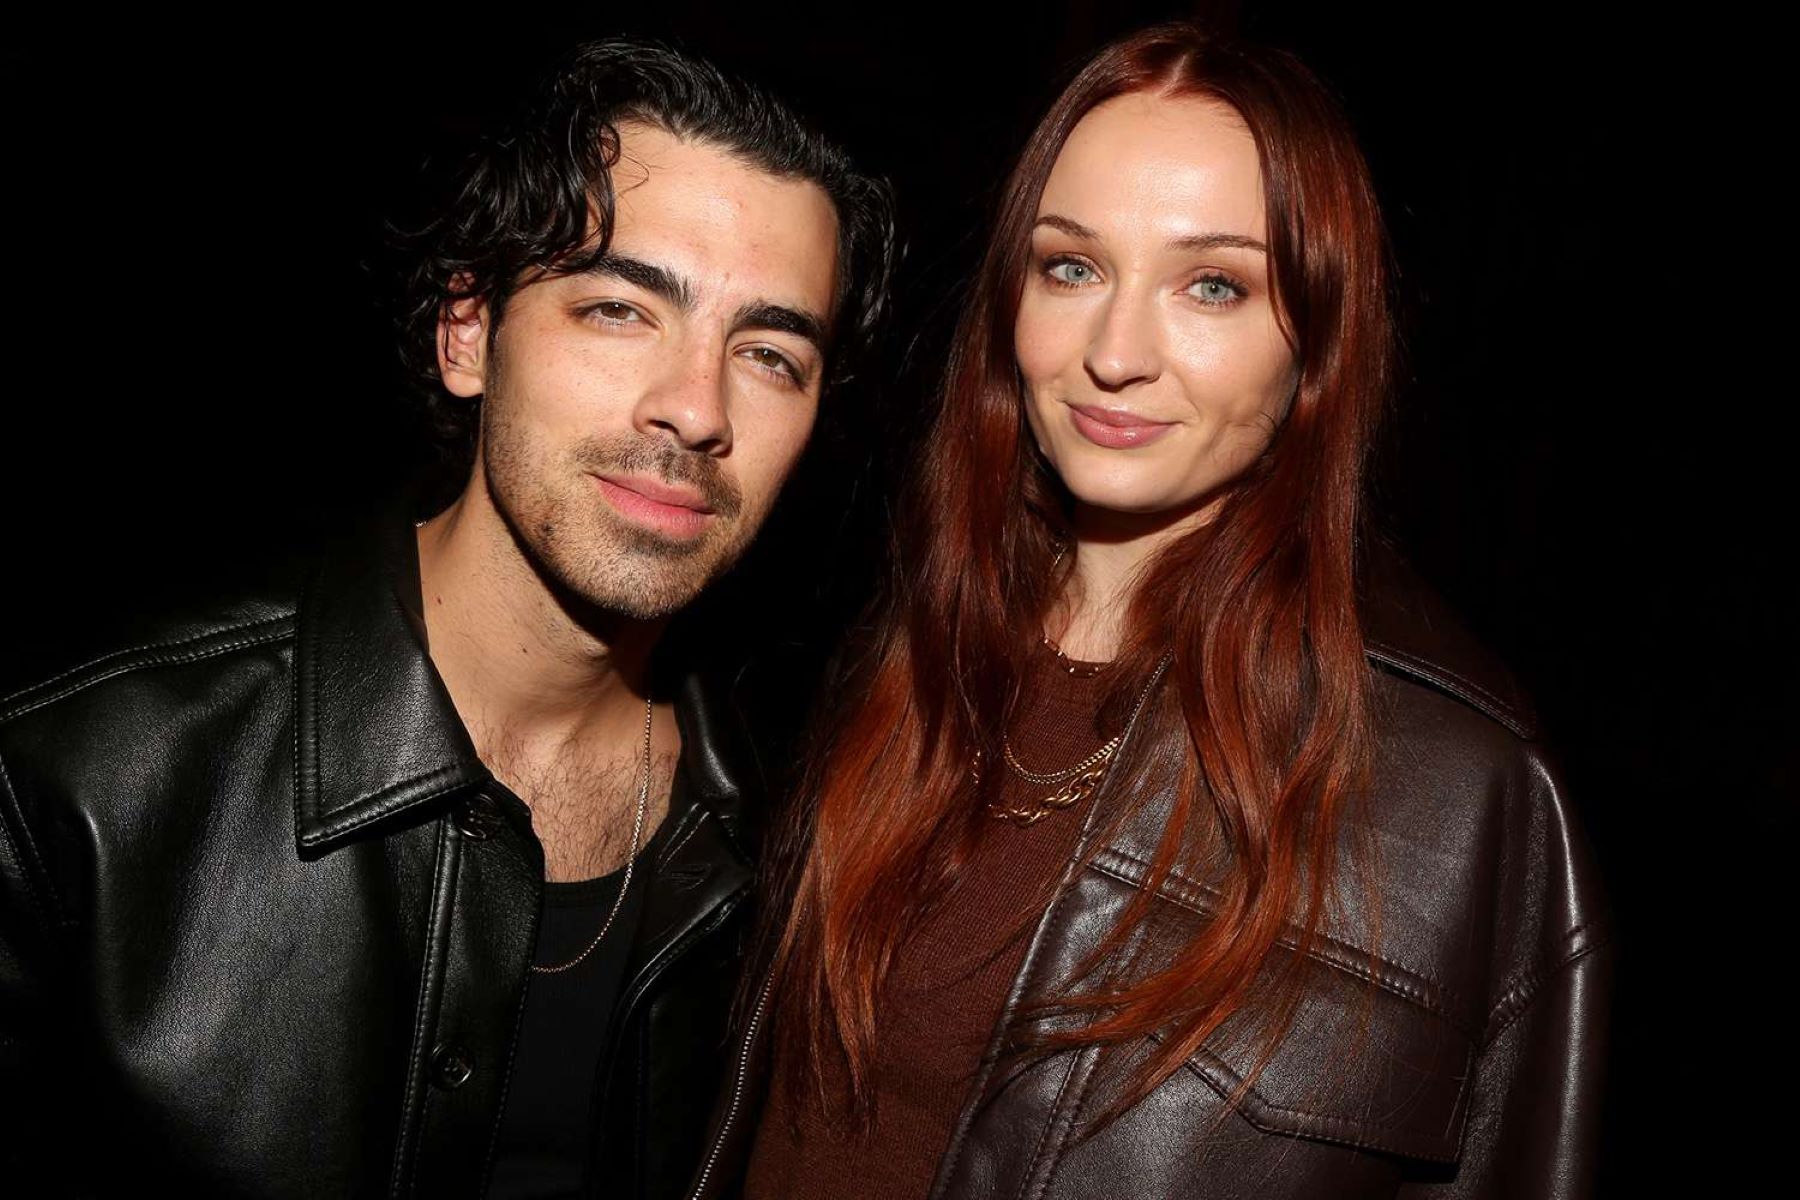 joe-jonas-files-for-divorce-after-allegedly-seeing-incriminating-footage-on-ring-camera